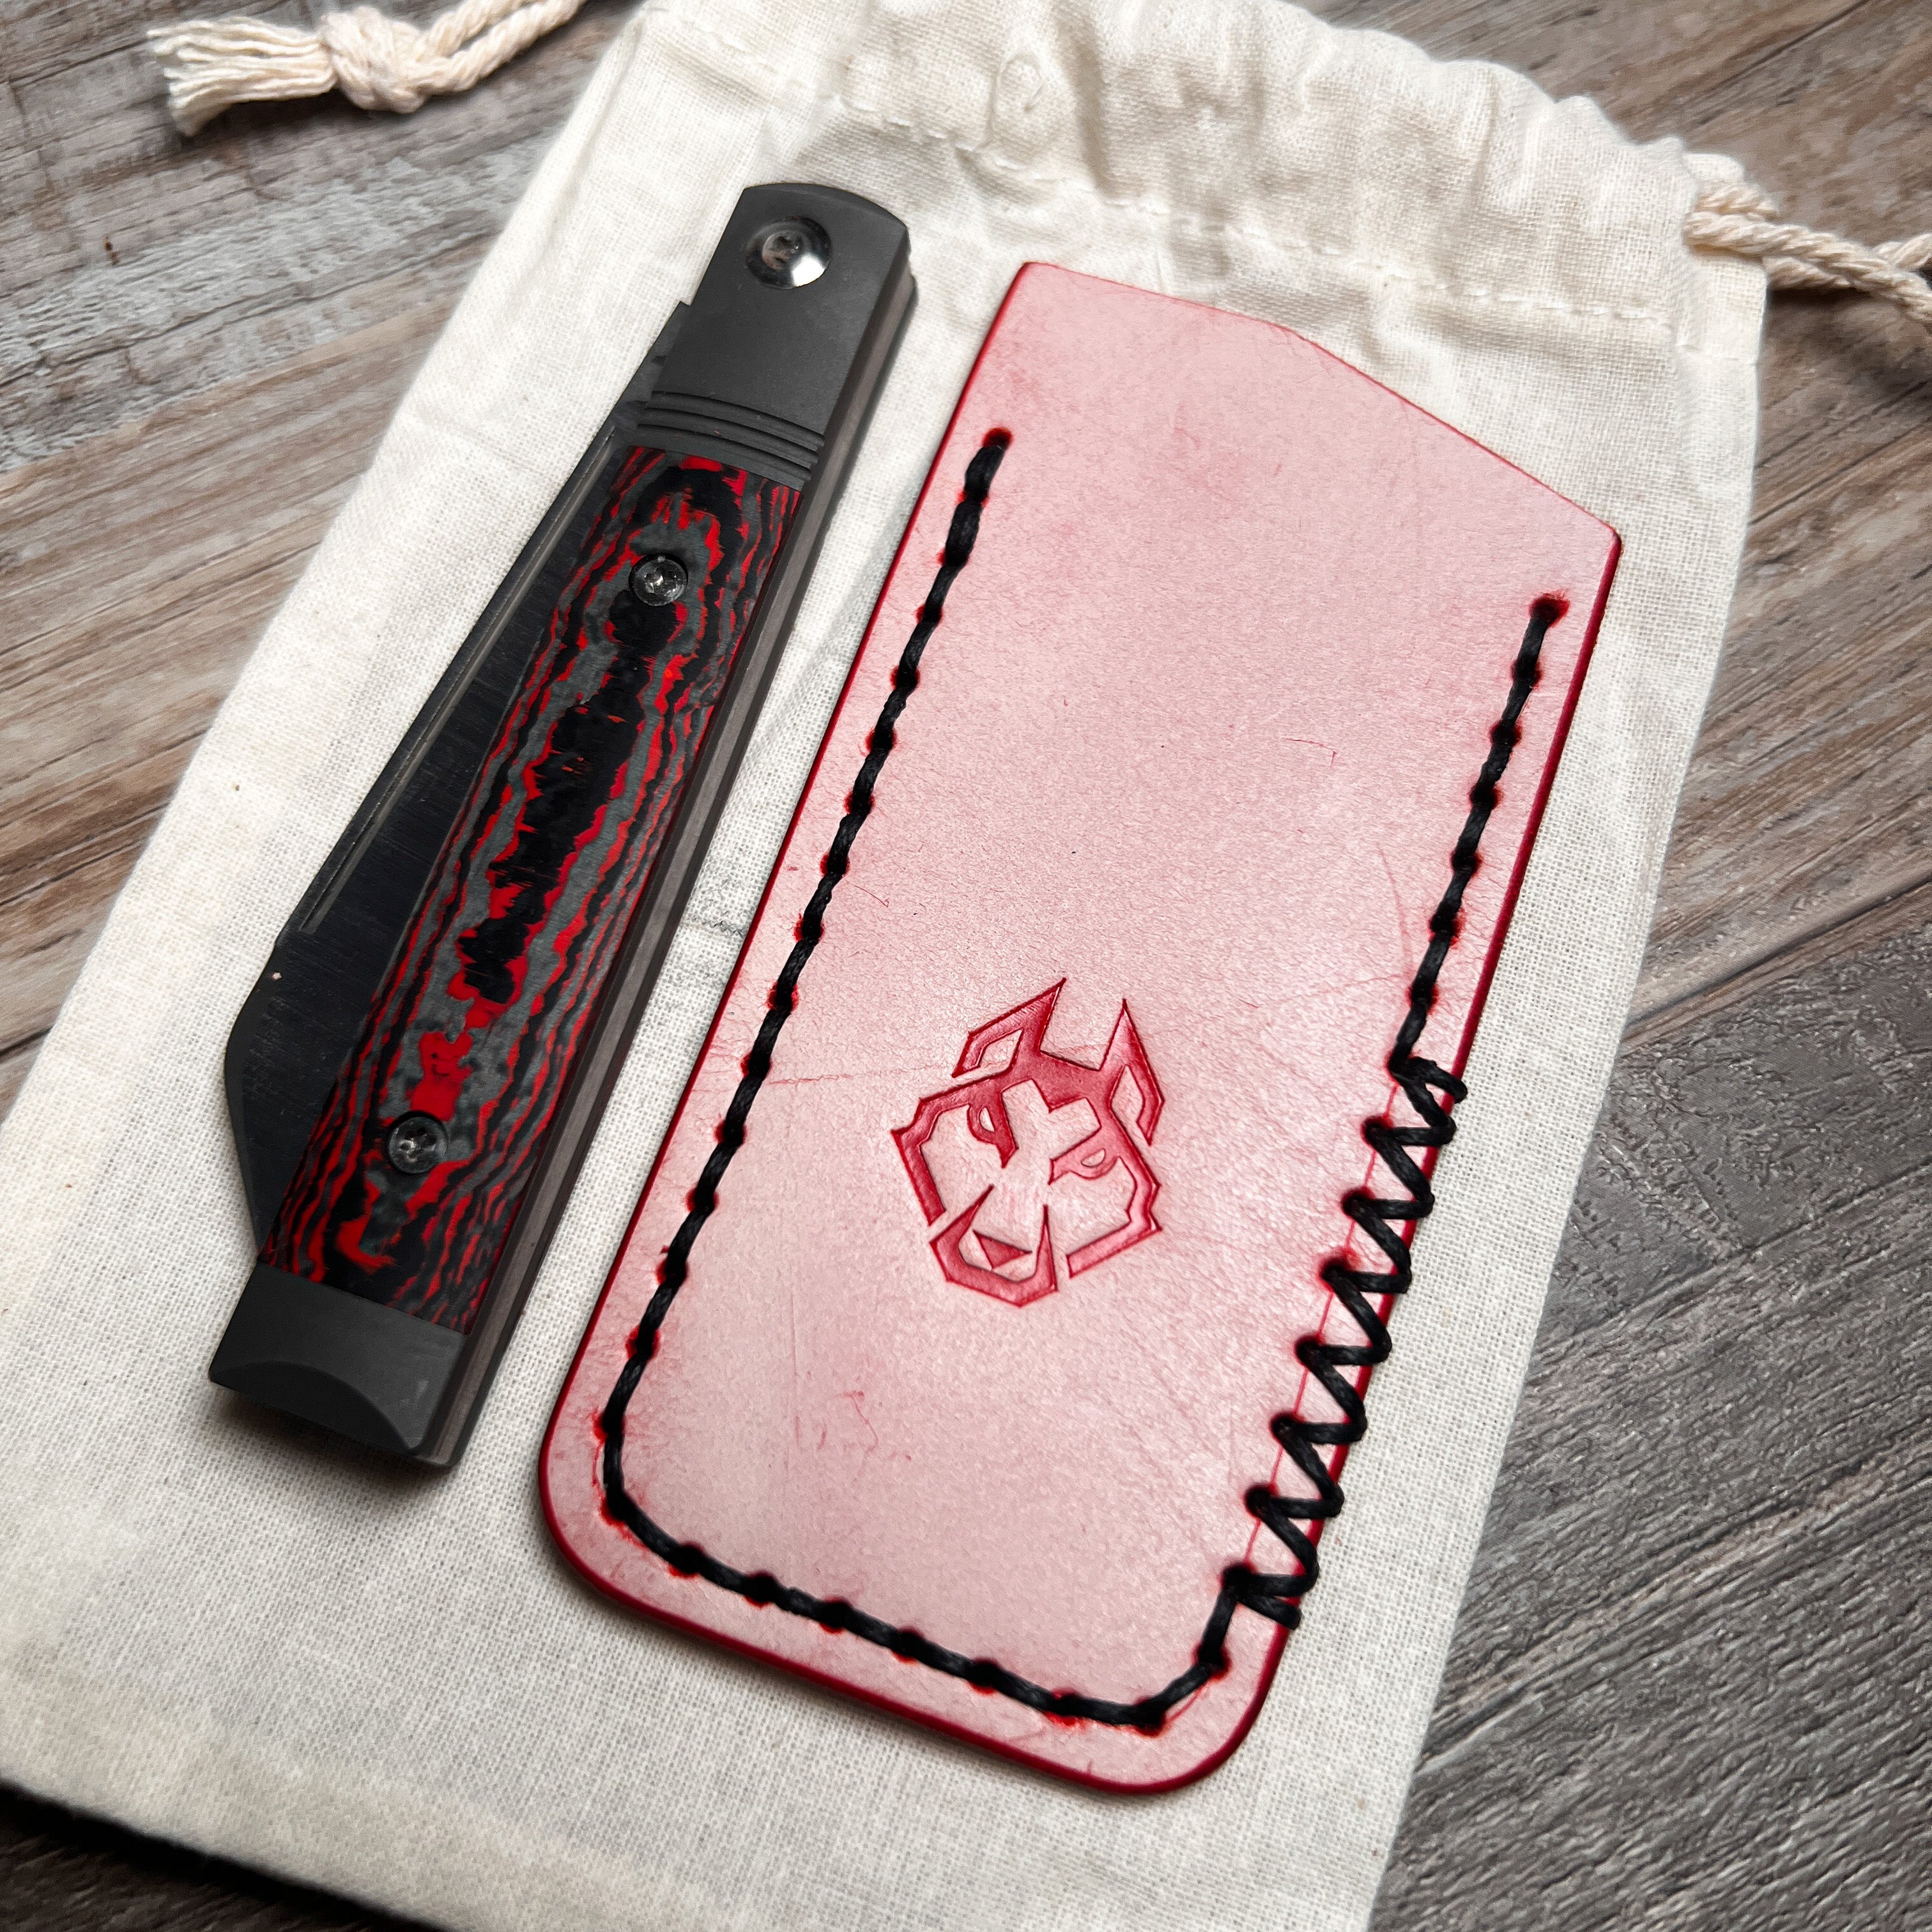 Northwoods Leatherworks Slip - Red Ghost Leather Buttero Black Thread